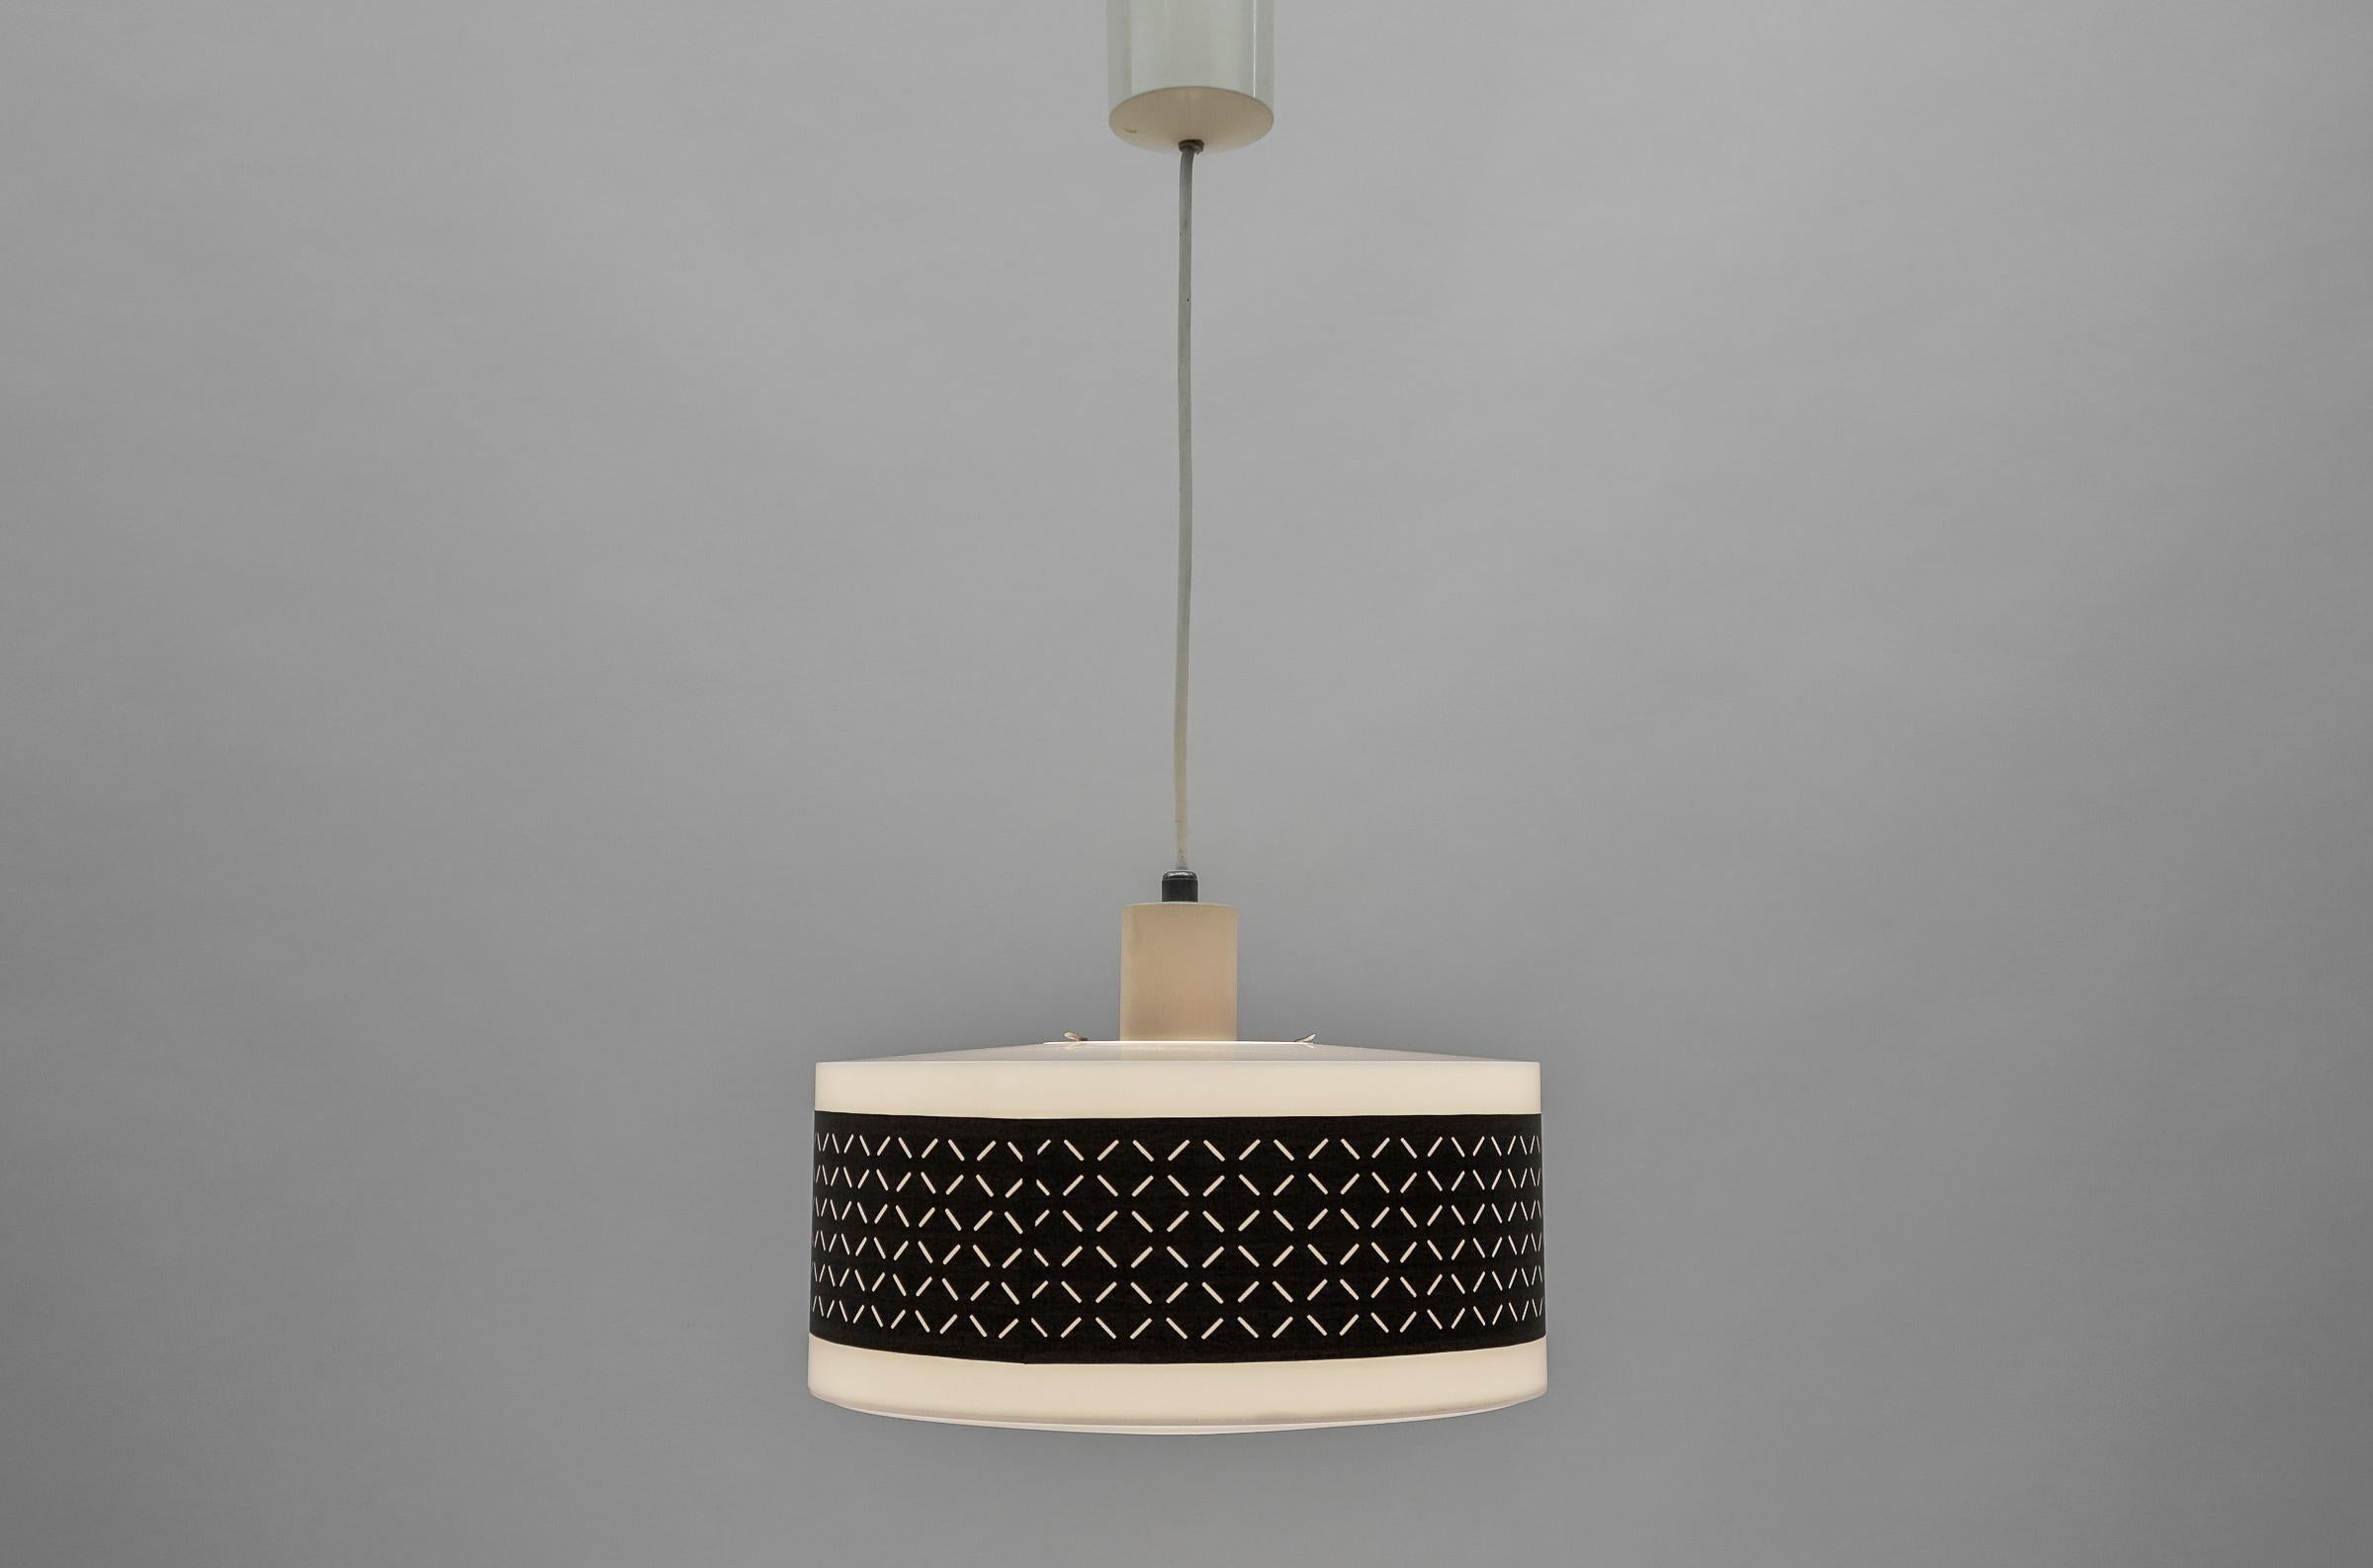 Rare Brown & White Pendant Lamp by Aloys F. Gangkofner for ERCO Leuchten In Good Condition For Sale In Nürnberg, Bayern